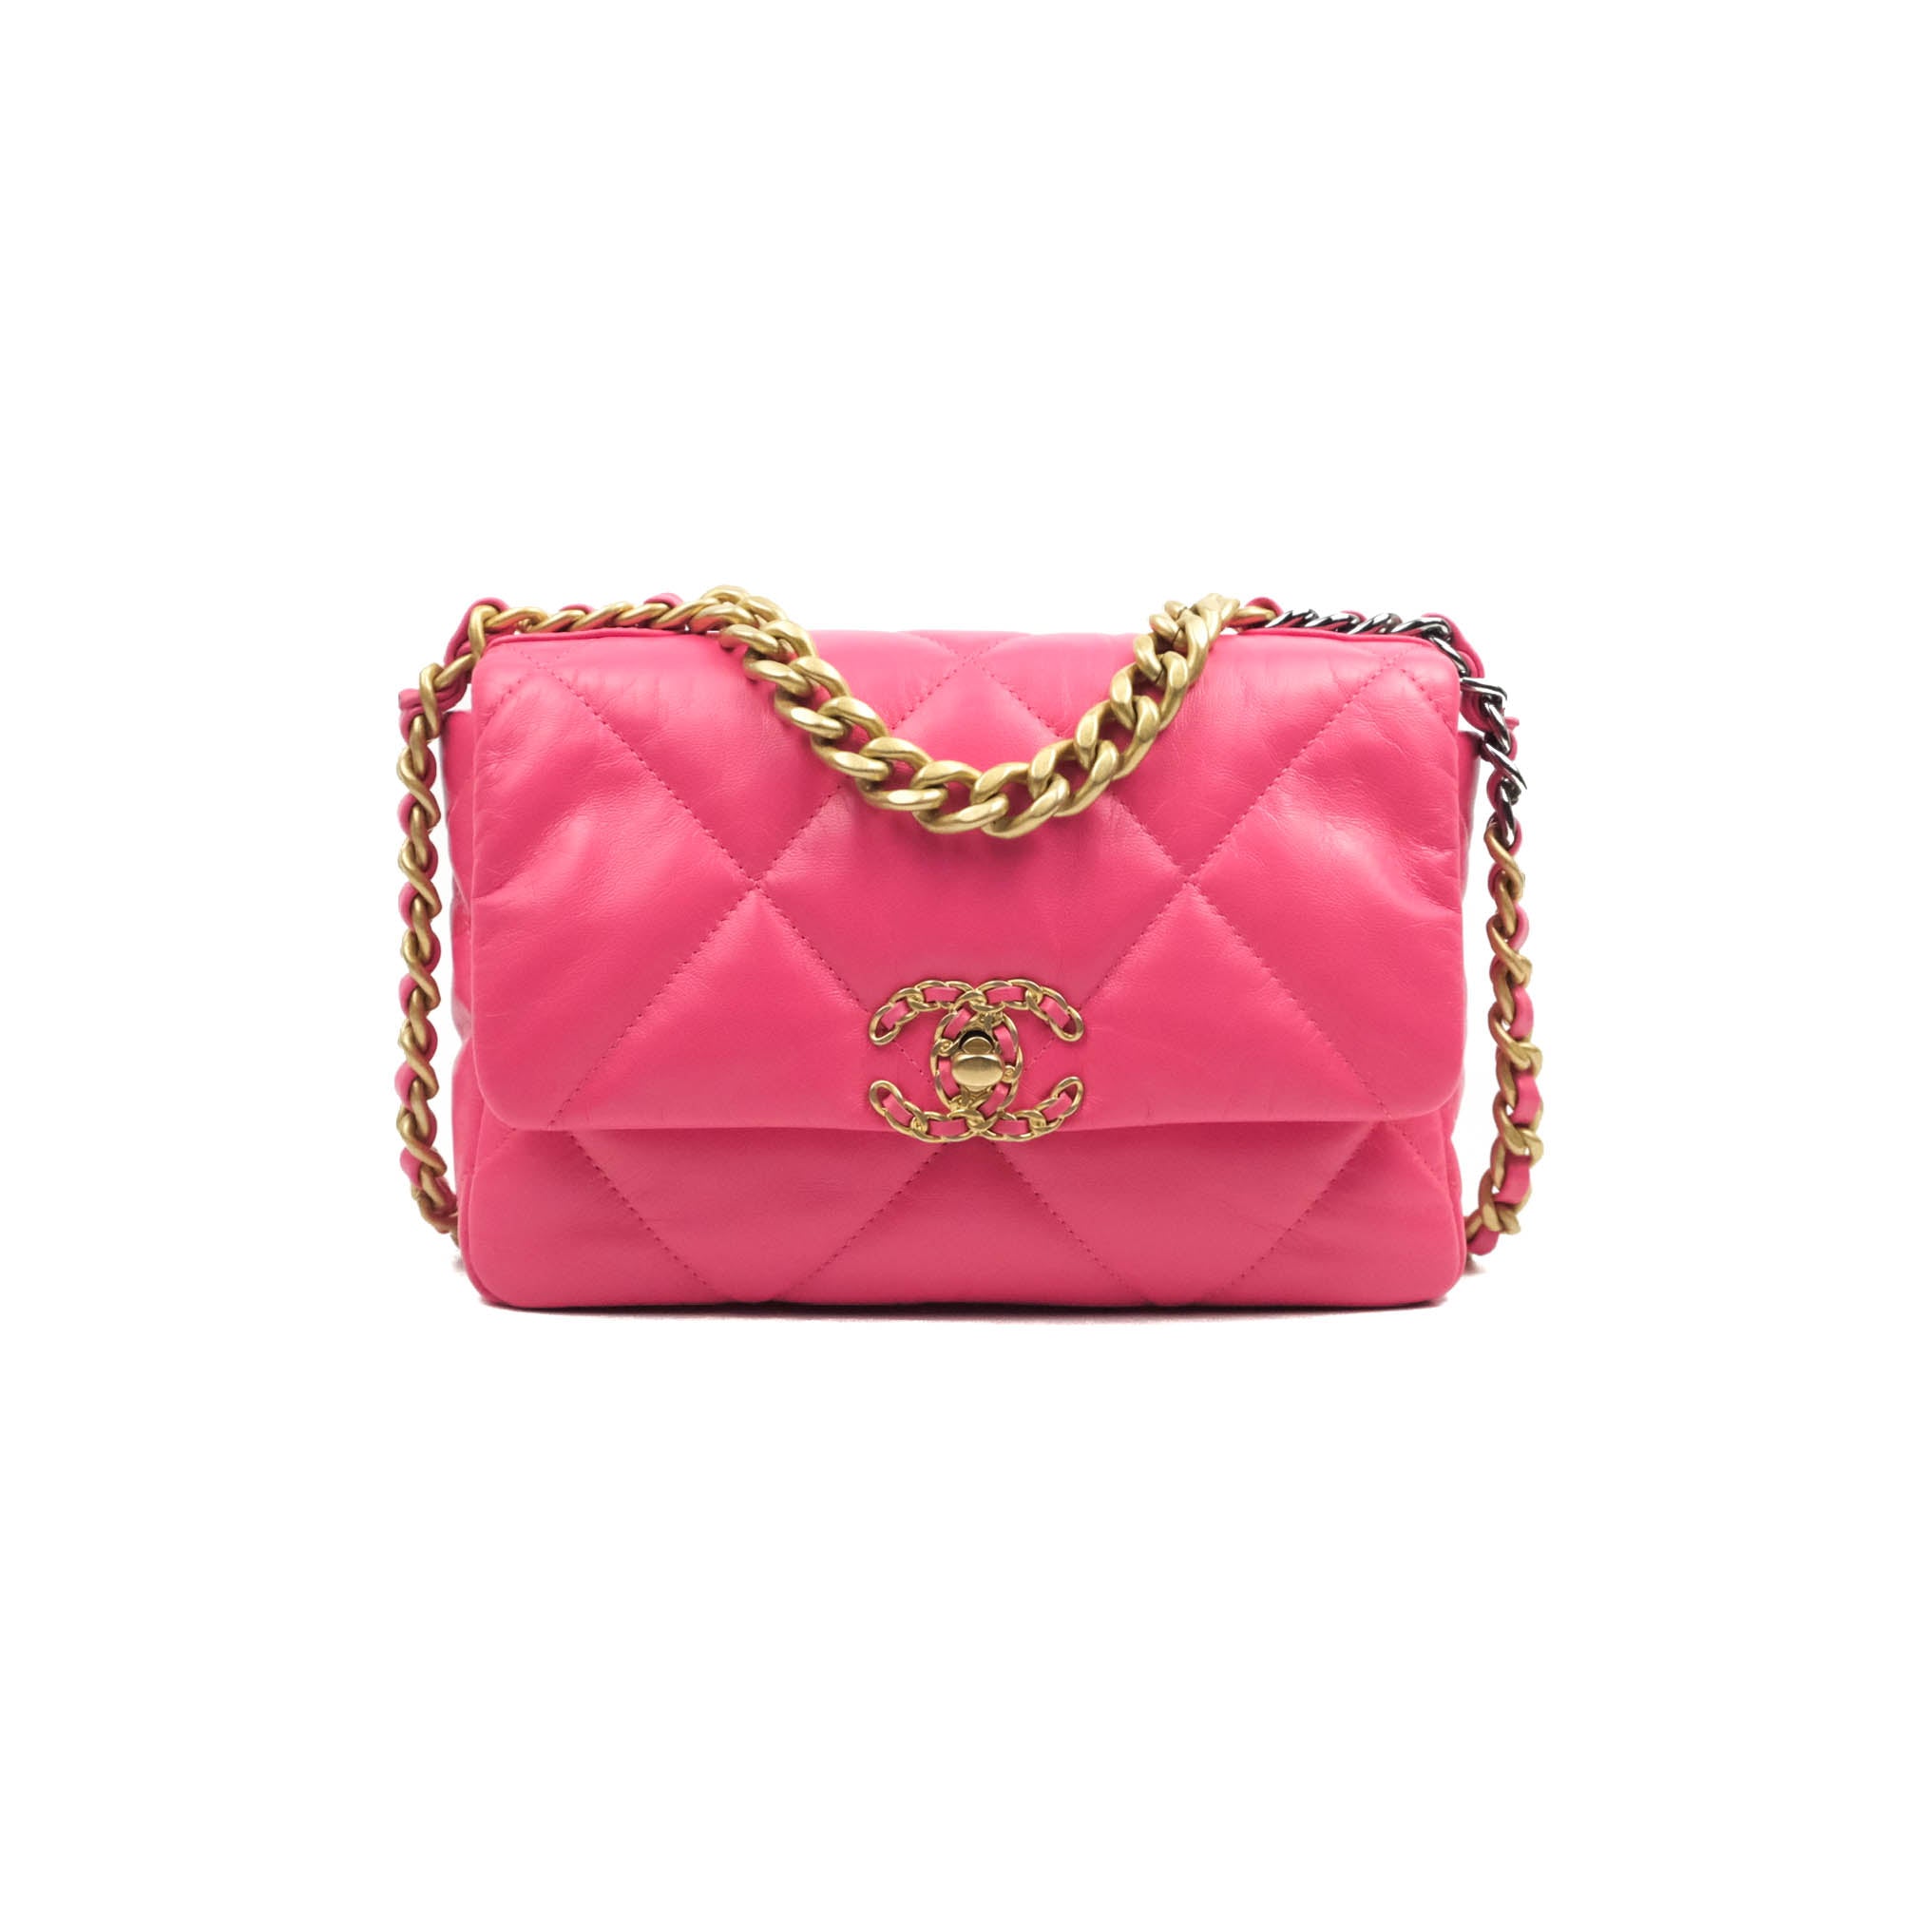 CHANEL 🌸 2020 20C 19 Flap Small Pink 🌸 Bag Classic Gold Silver Hw